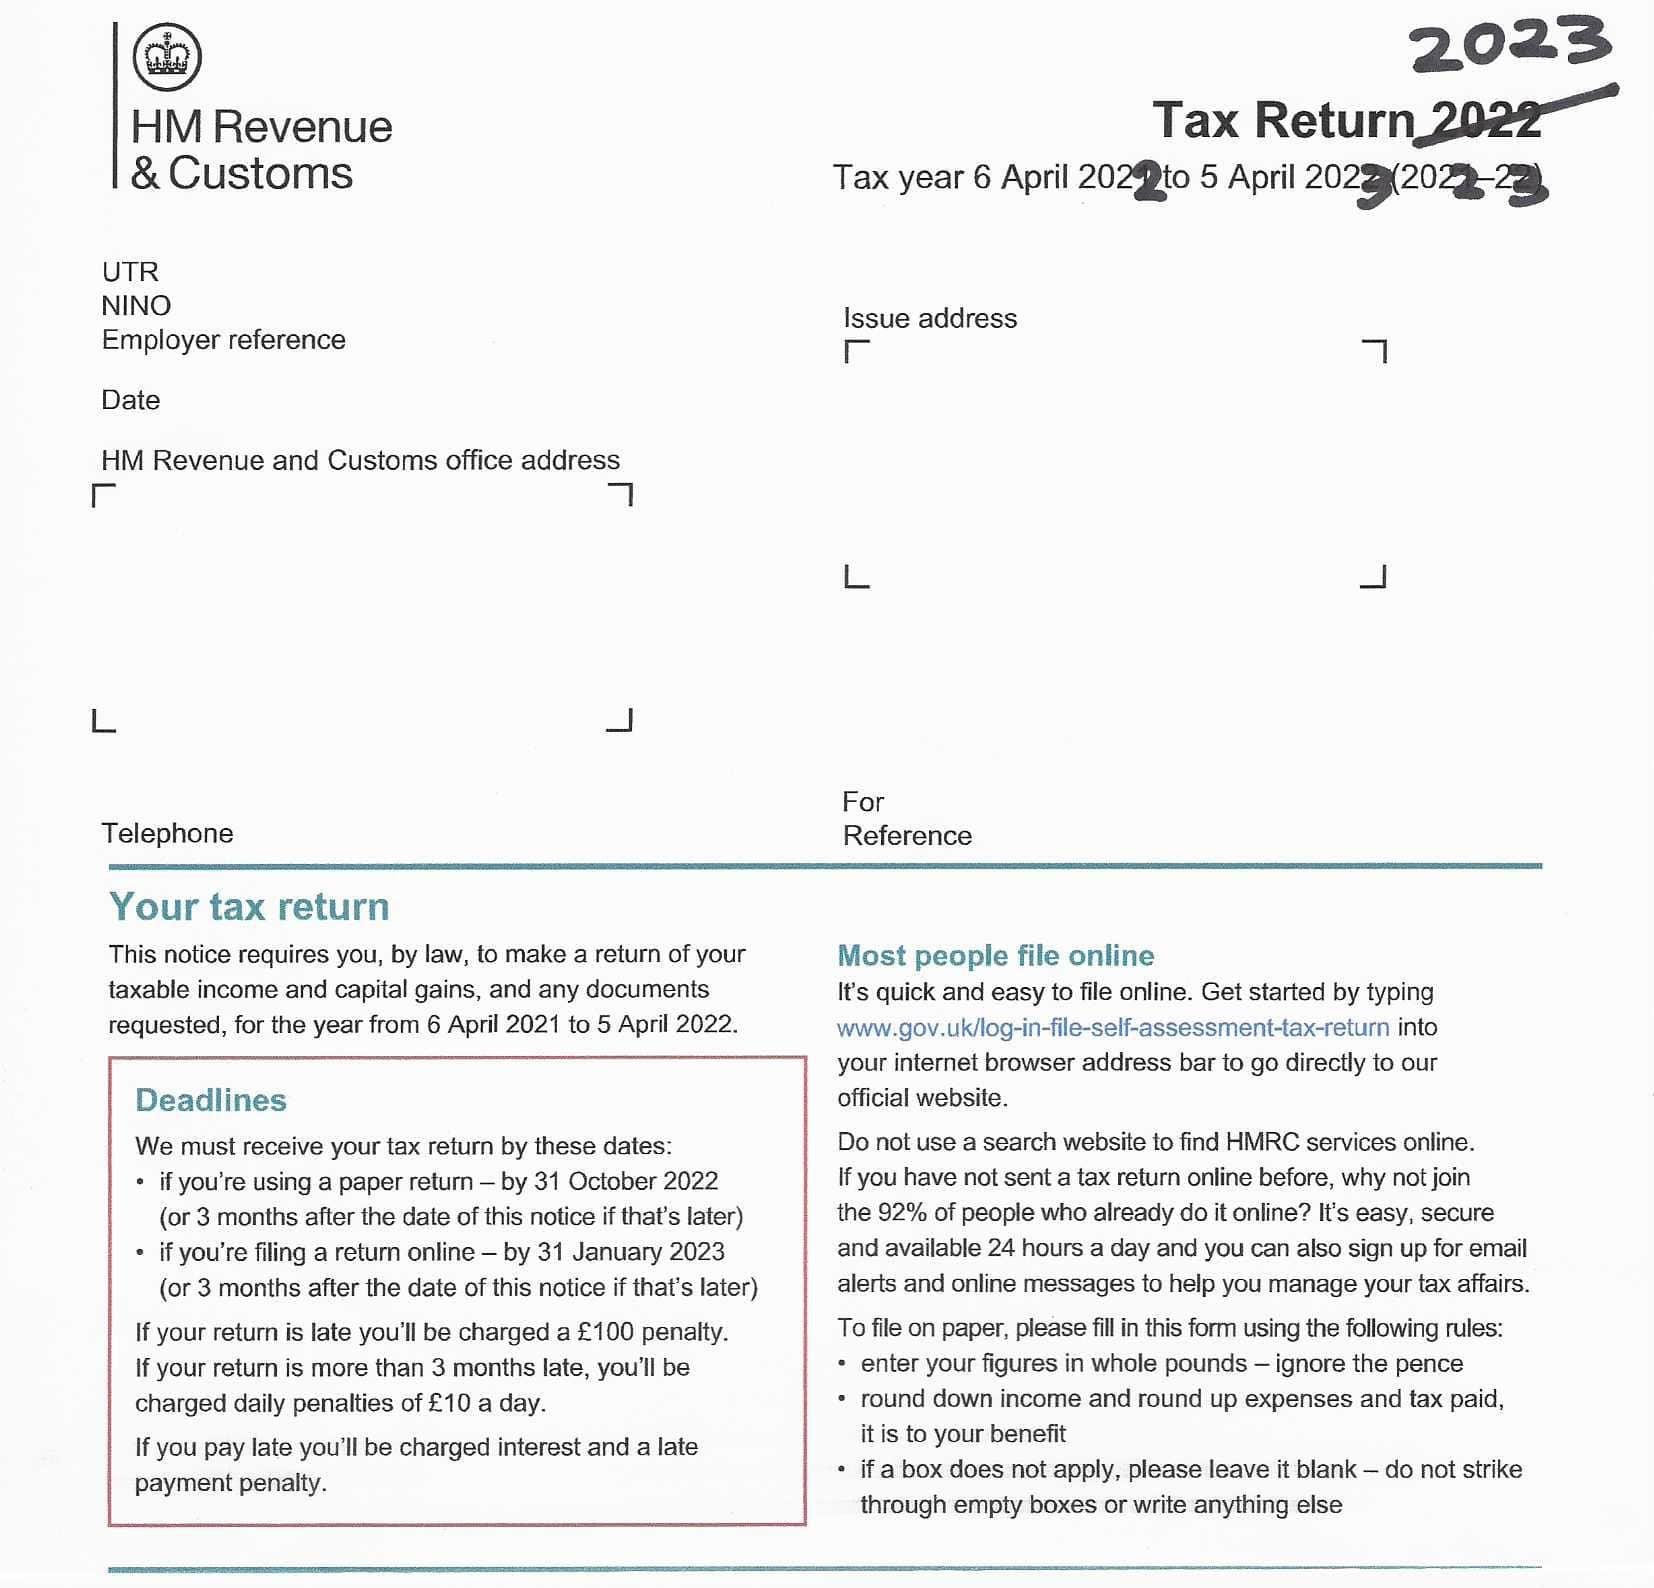 Trying to Locate the 2023 HMRC Paper Tax Return Form Online?